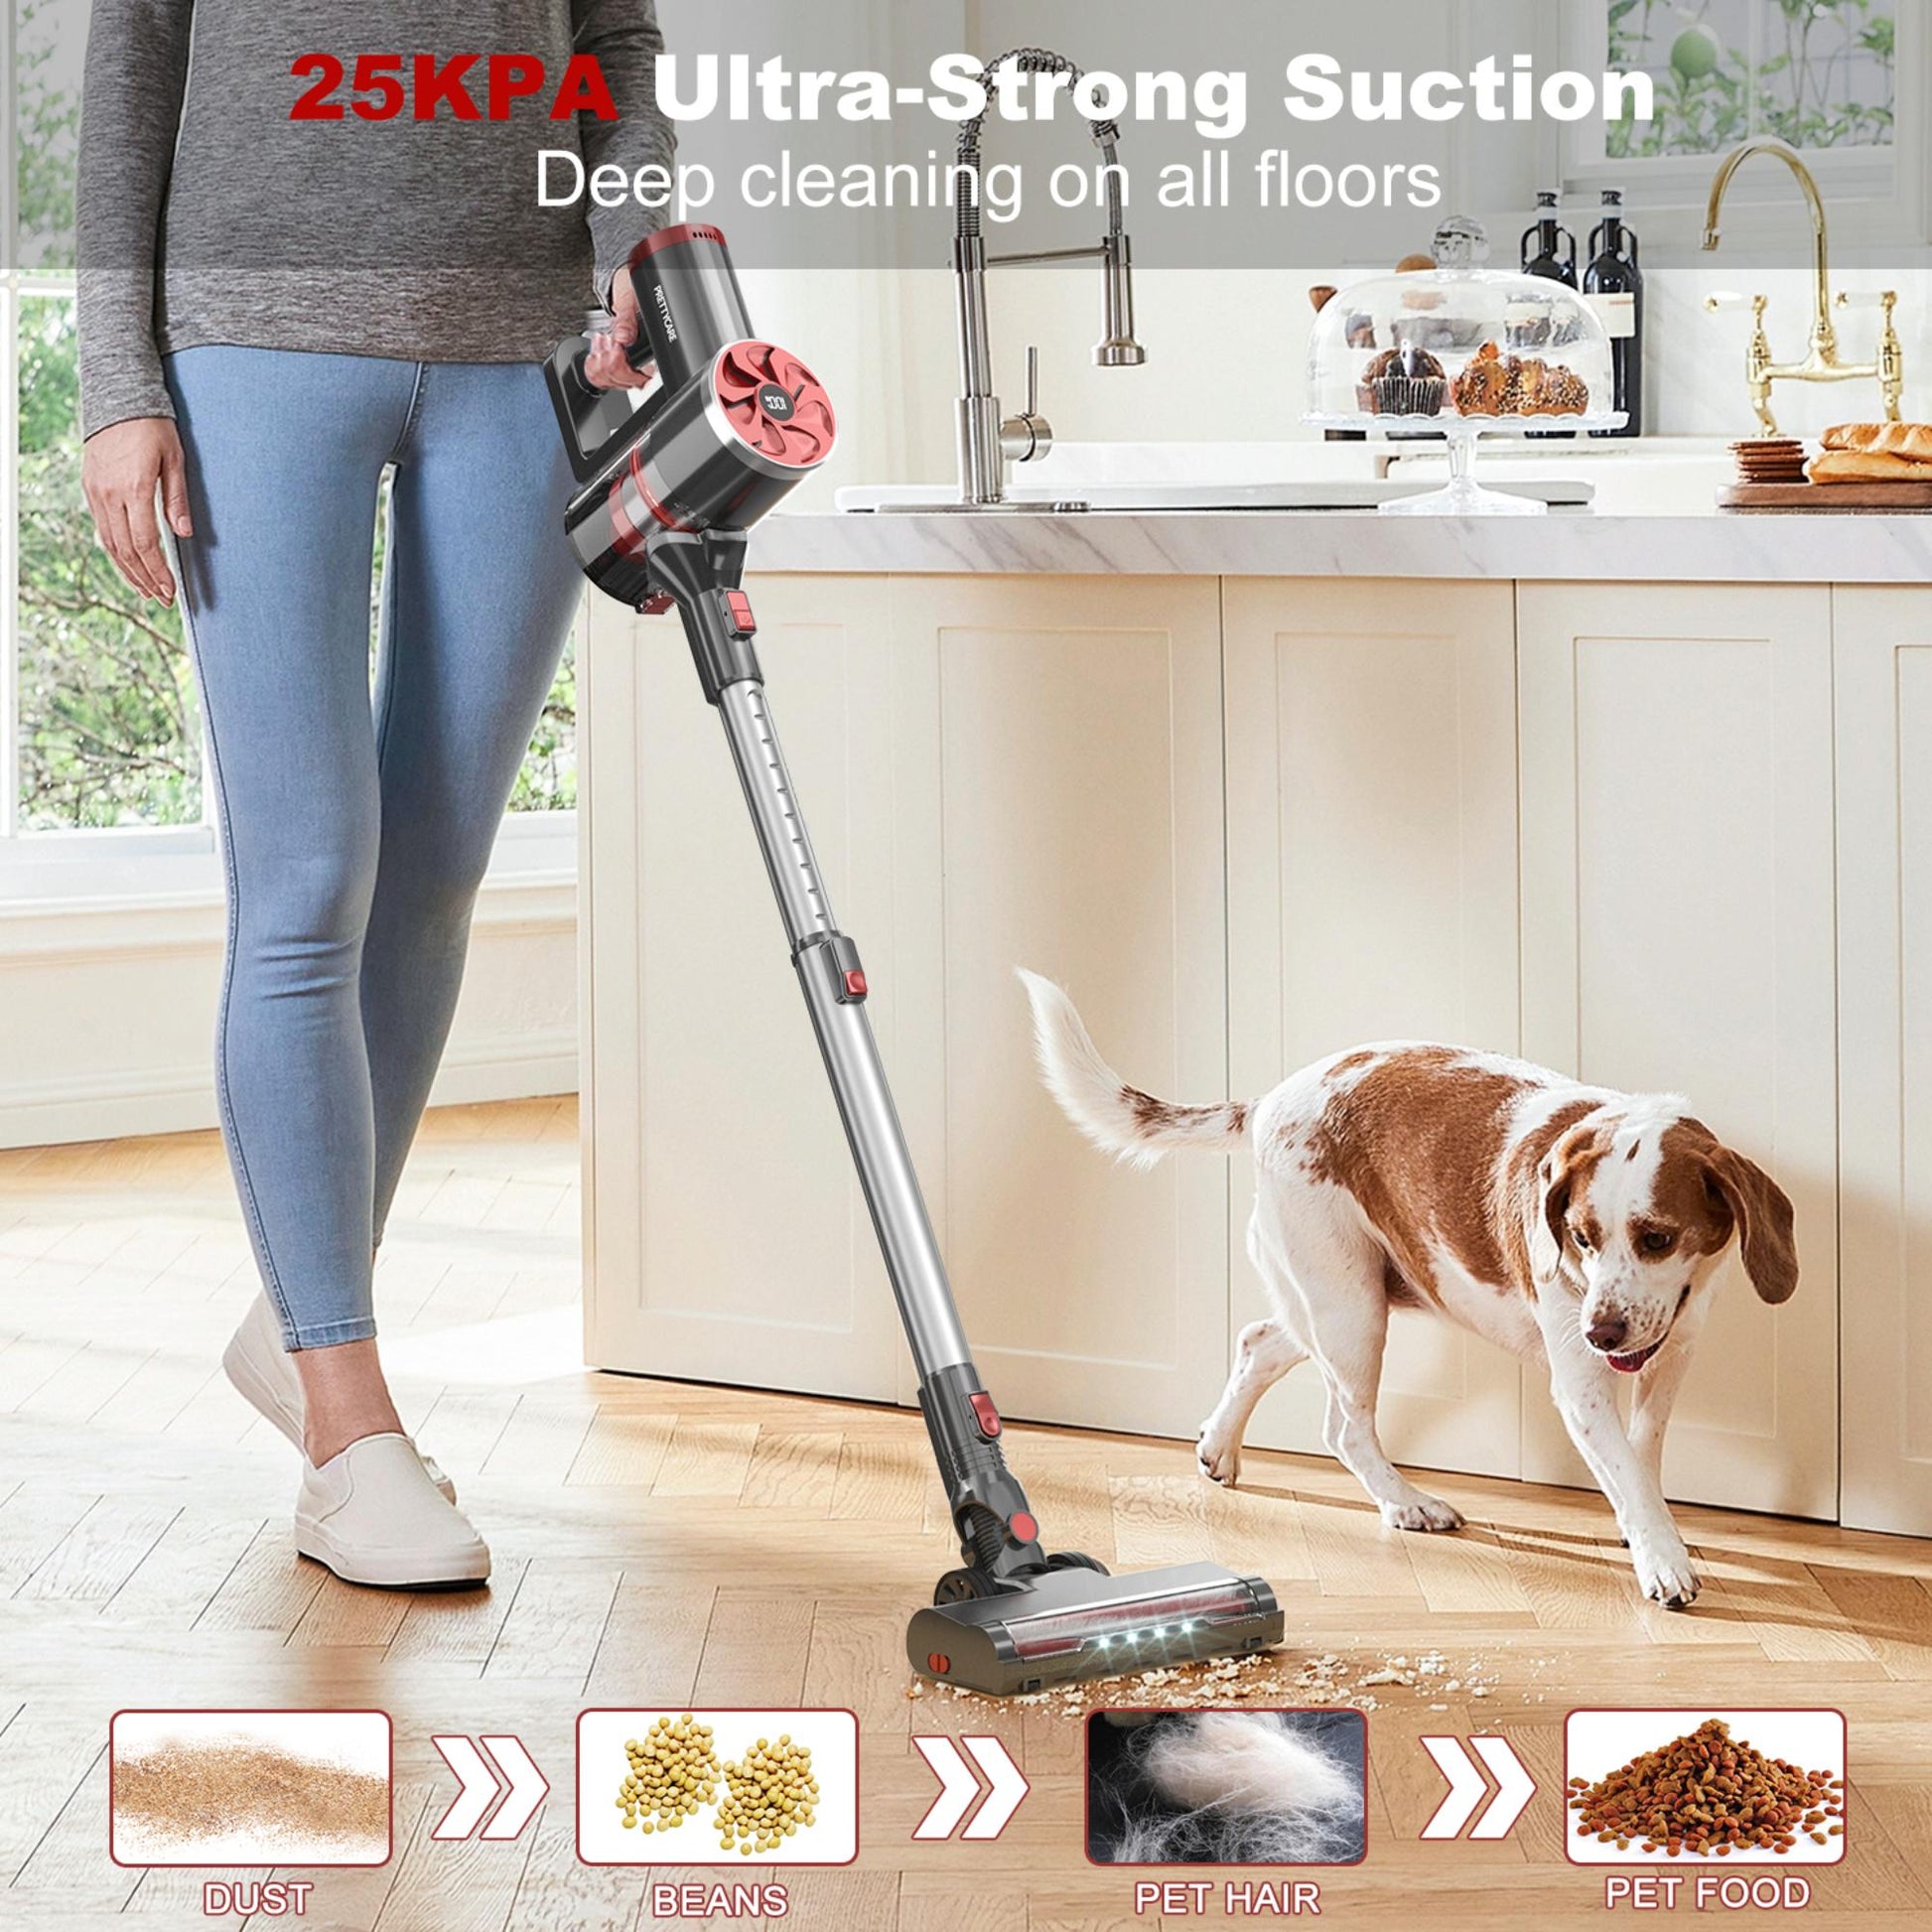 Pretty Care P4 Stick Vacuum Cleaner with 25 kPa Ultra-Strong Suction. | Blue Chilli Electronics.